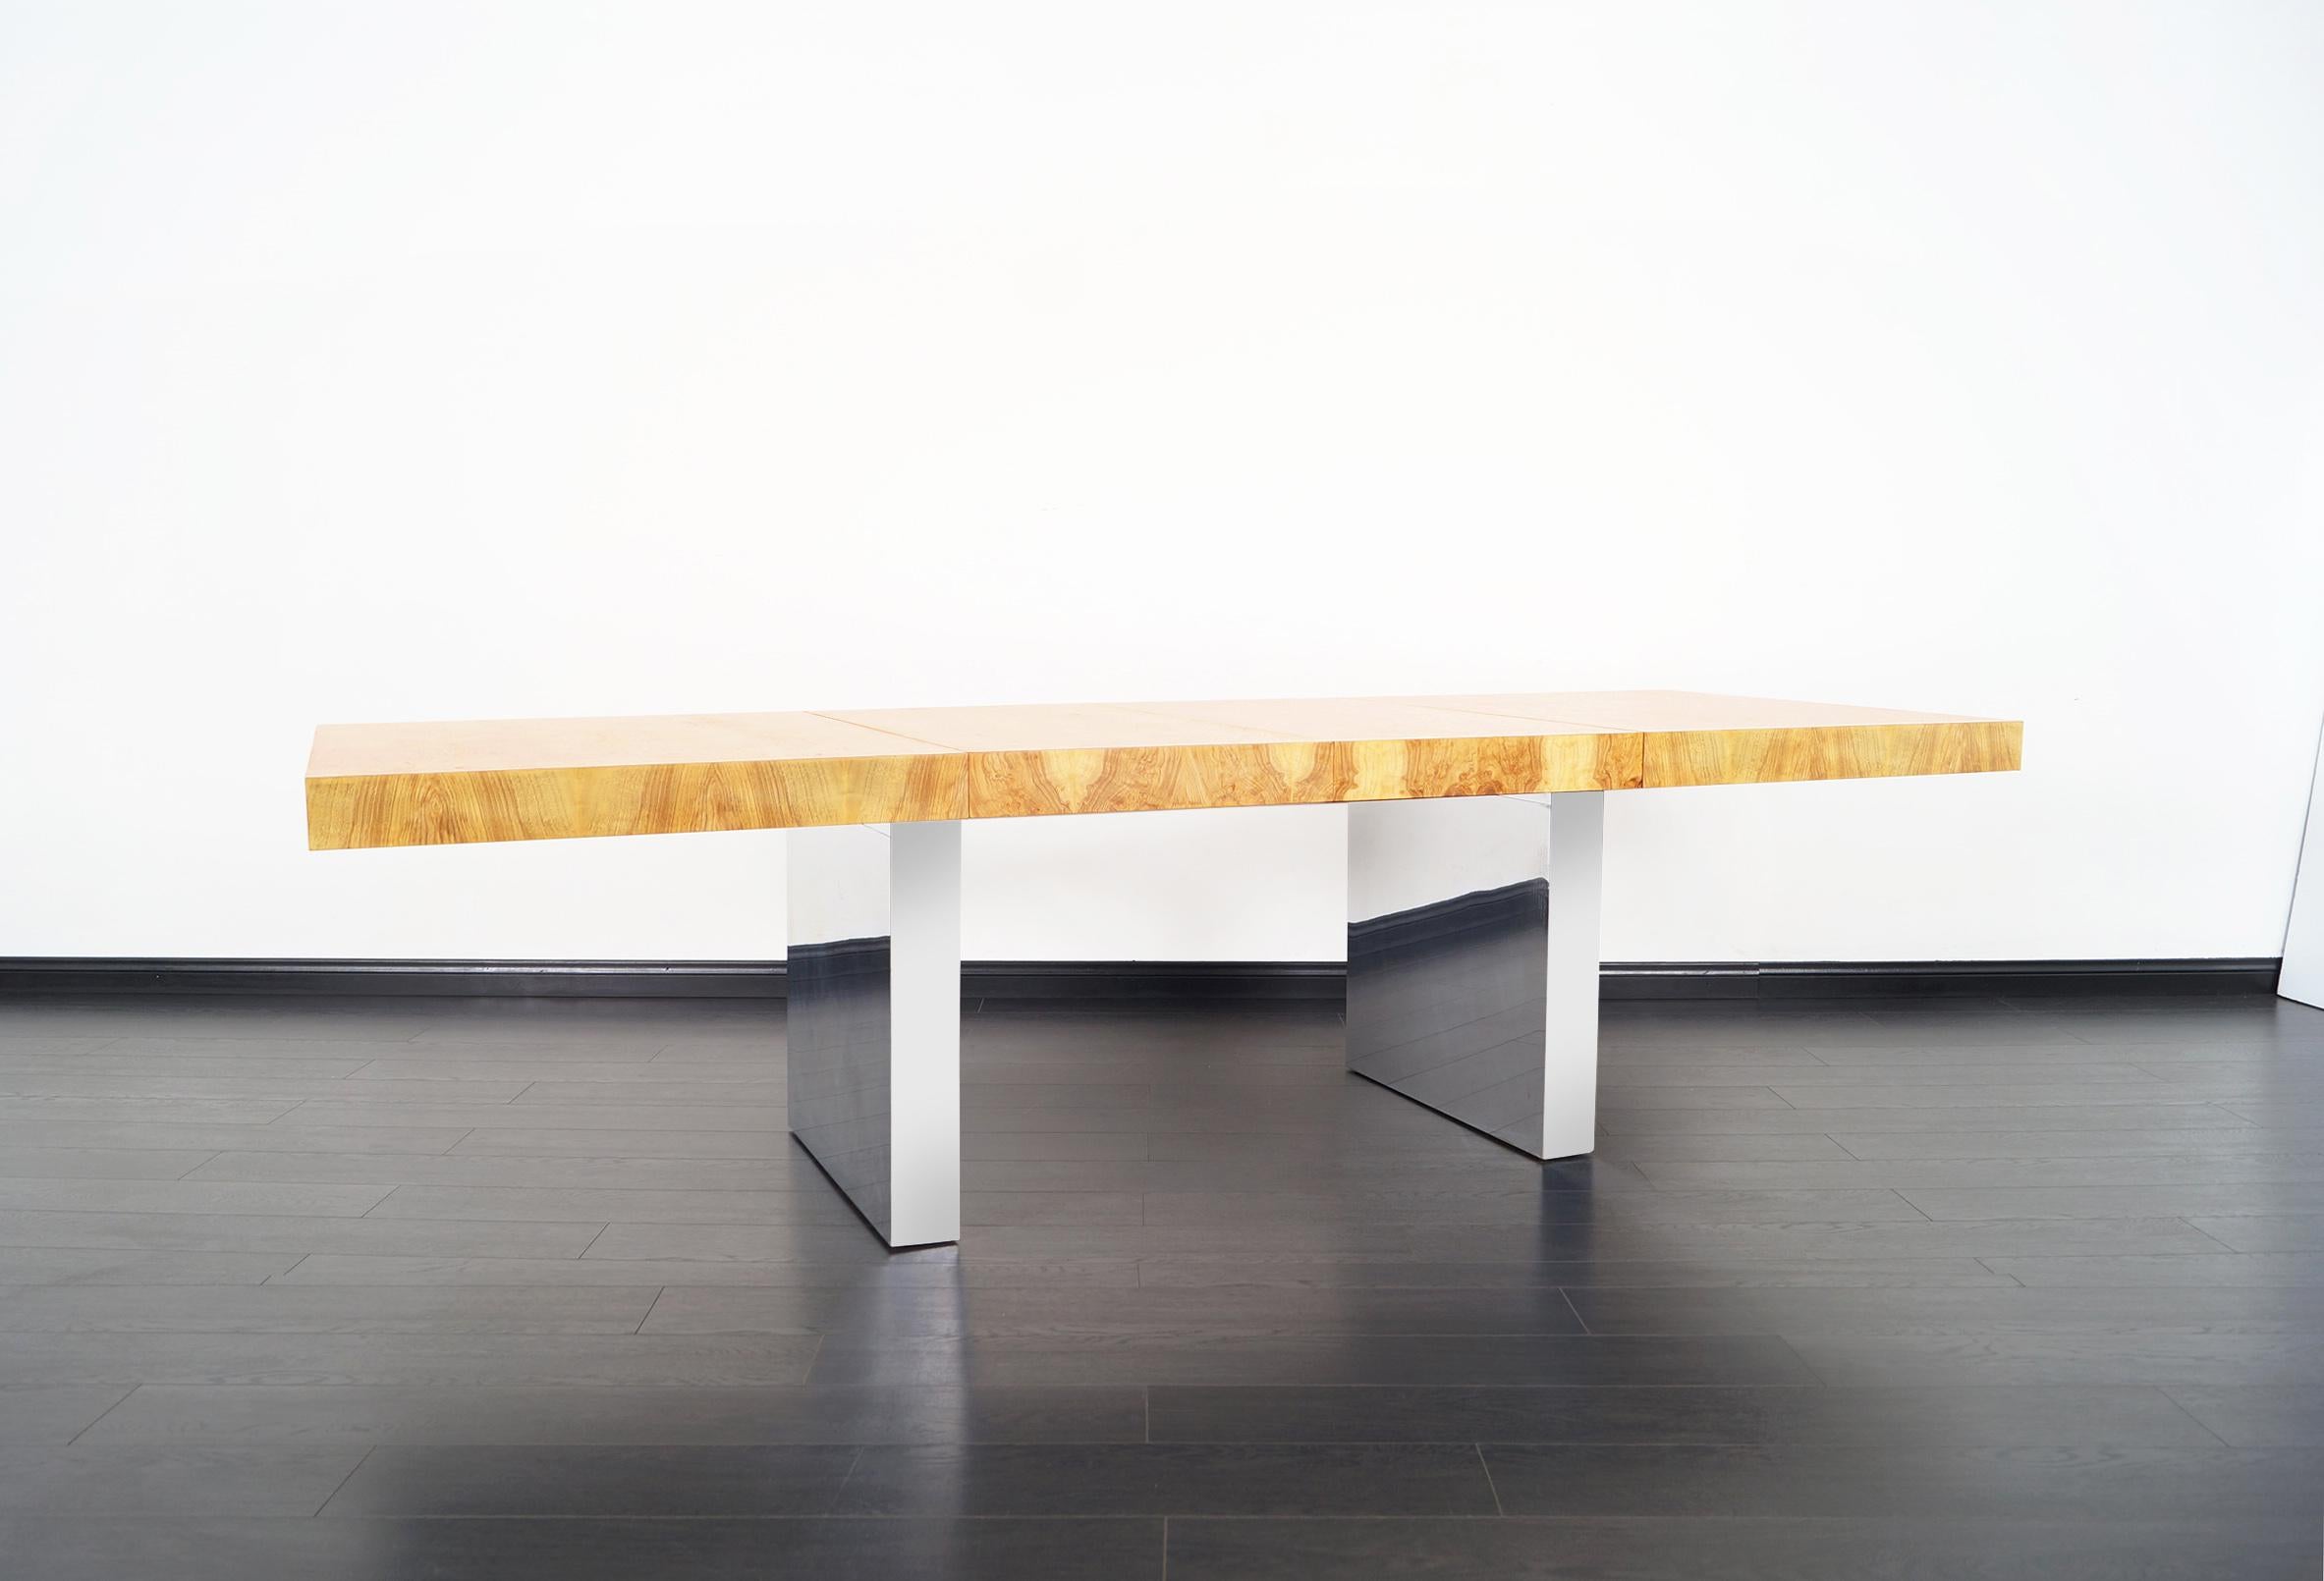 Incredible vintage burl wood dining table designed by Milo Baughman for Thayer Coggin. Its versatile design allows it to serve as a dining table, conference table, or desk. Features a burl wood top that sits over a pair of rectangular chrome